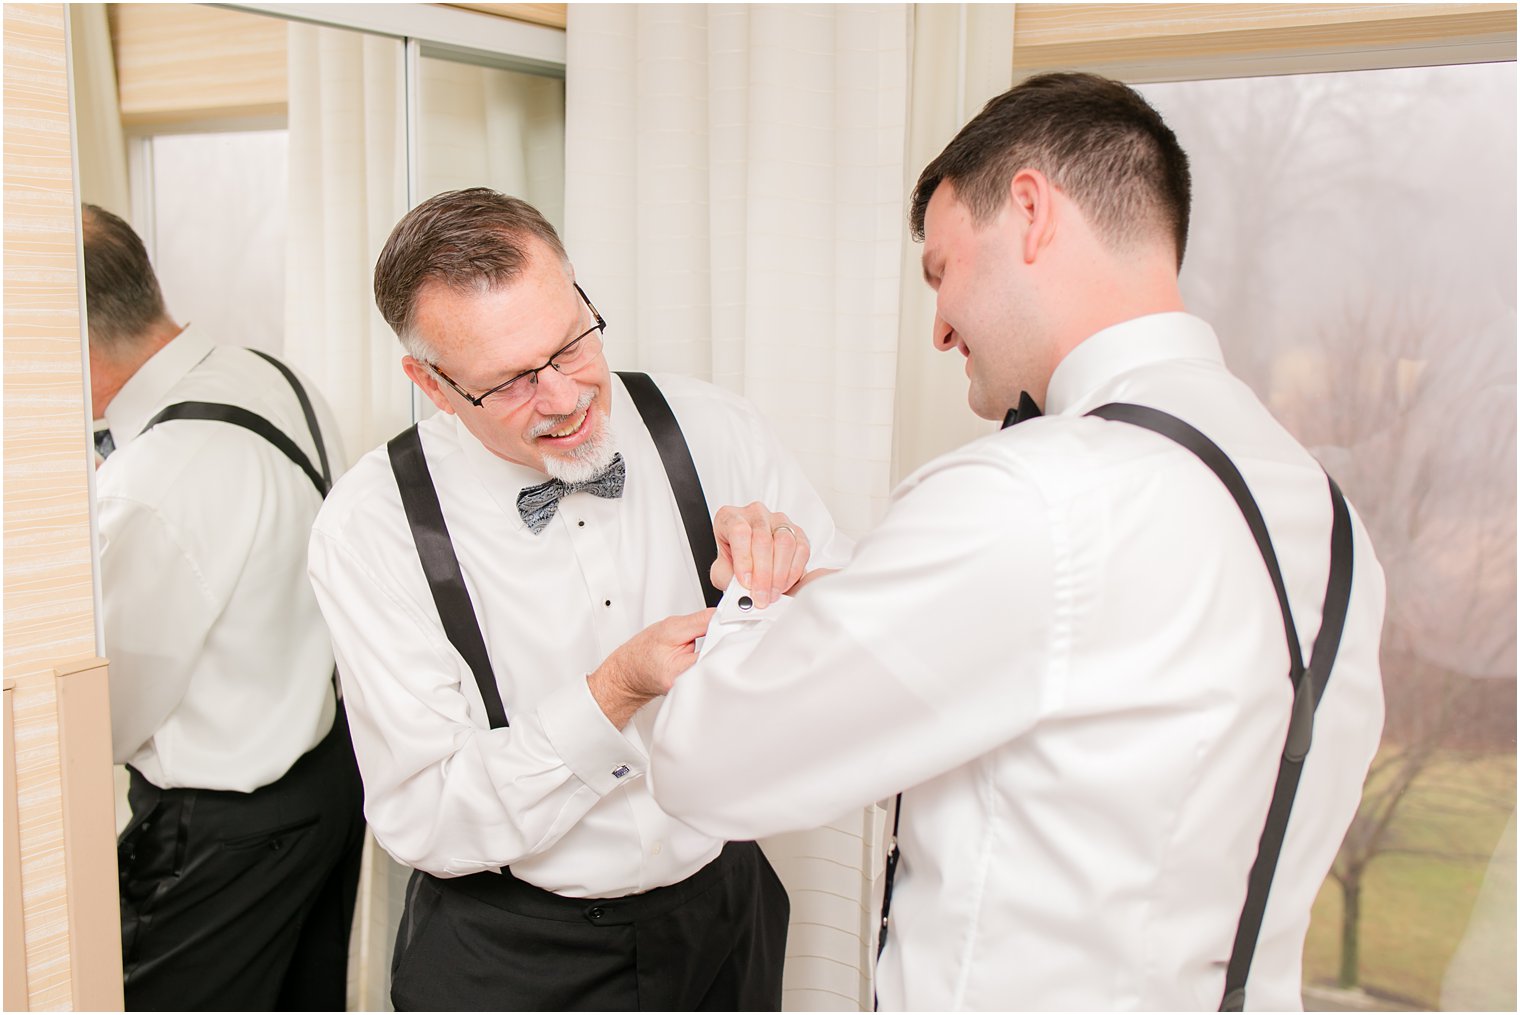 Father of the groom putting on groom's cufflinks